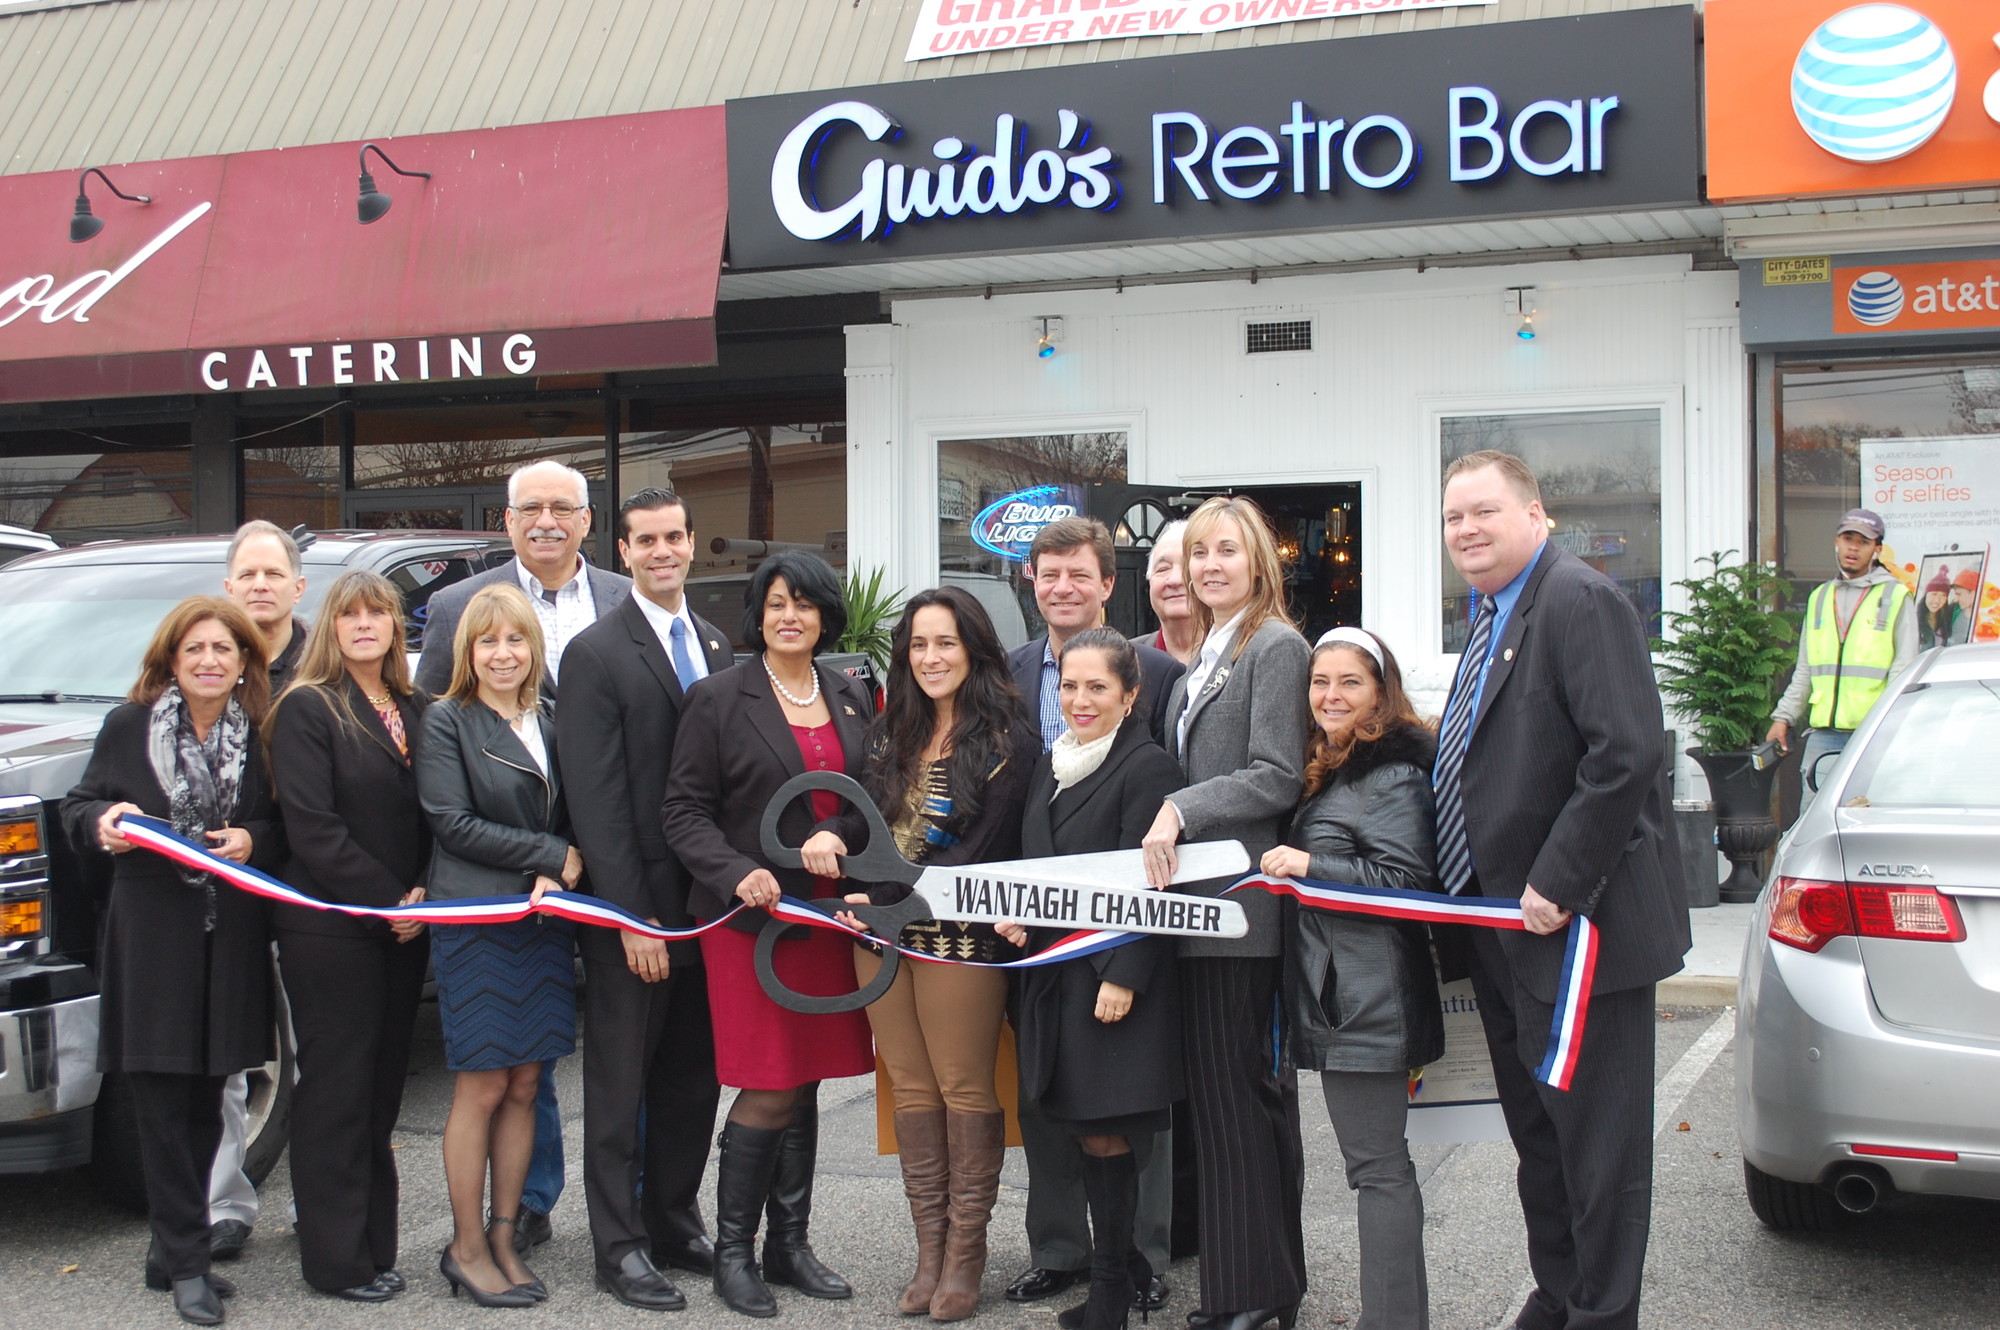 Chamber of Commerce officials and elected leaders gathered to cut the ribbon at Guido’s Retro Bar on Wantagh Avenue on Nov. 25.